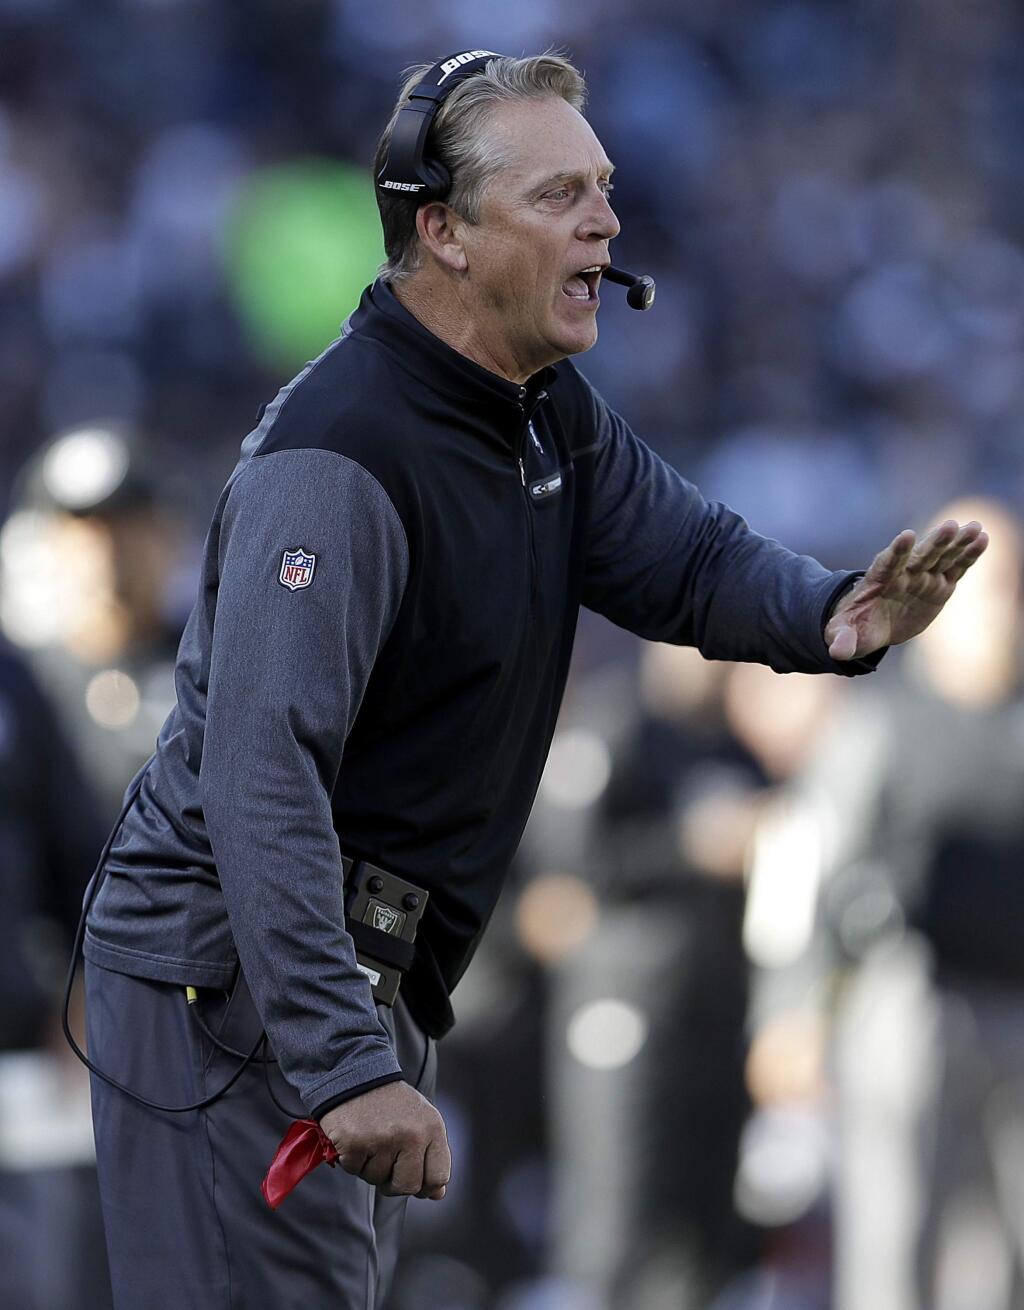 Oakland Raiders head coach Jack Del Rio gestures during the first half of an NFL football game against the New York Giants in Oakland, Calif., Sunday, Dec. 3, 2017. (AP Photo/Marcio Jose Sanchez)